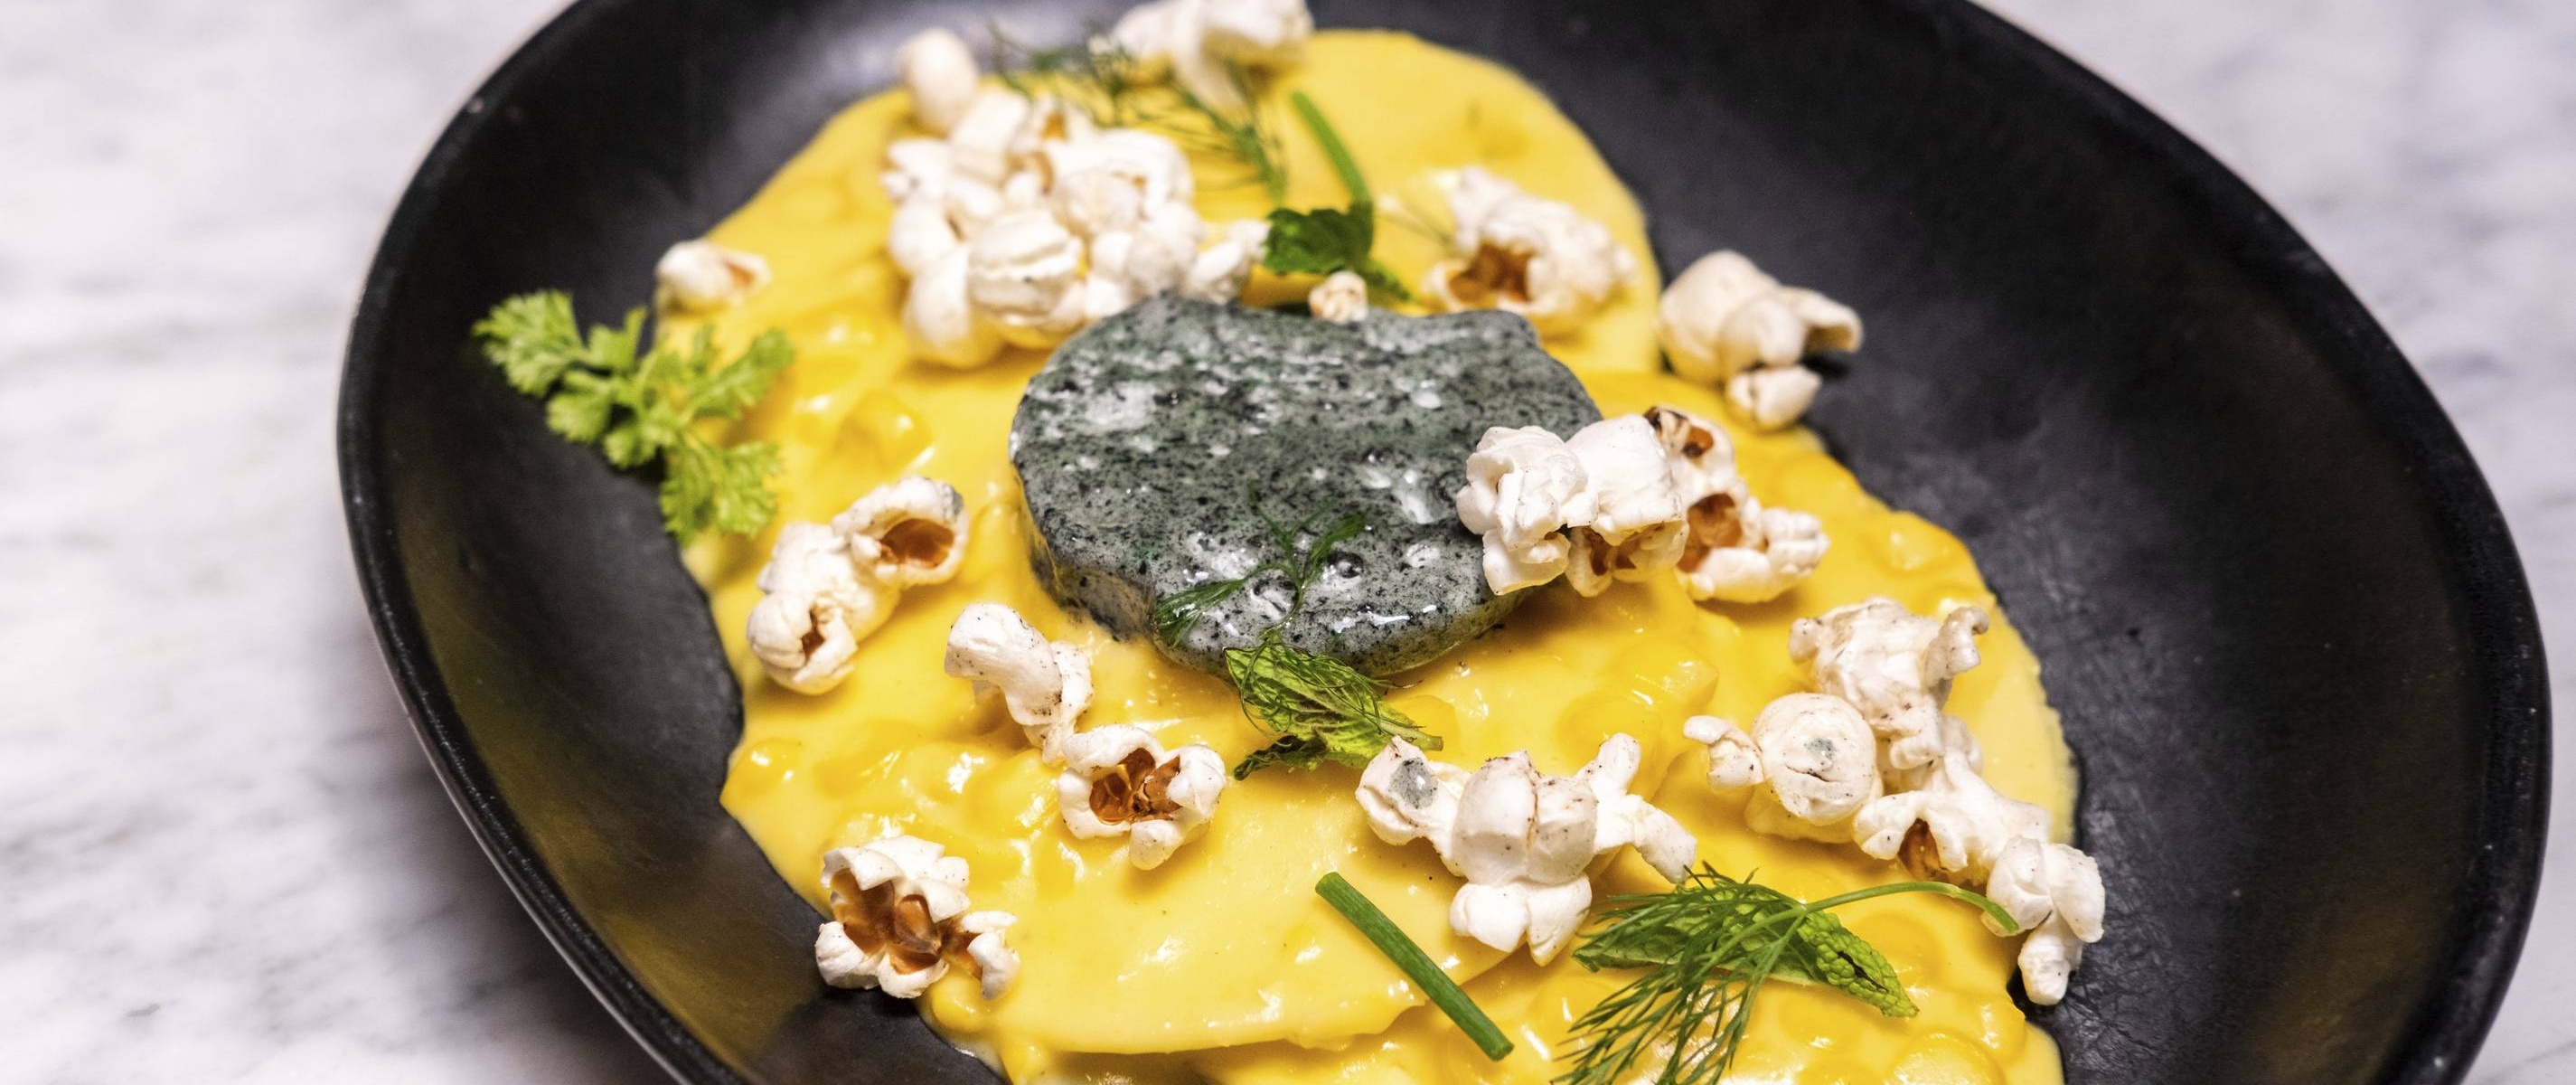 Weekly Recipe: Corn Ravioli With Huitlacoche Butter By SPQR In San Francisco